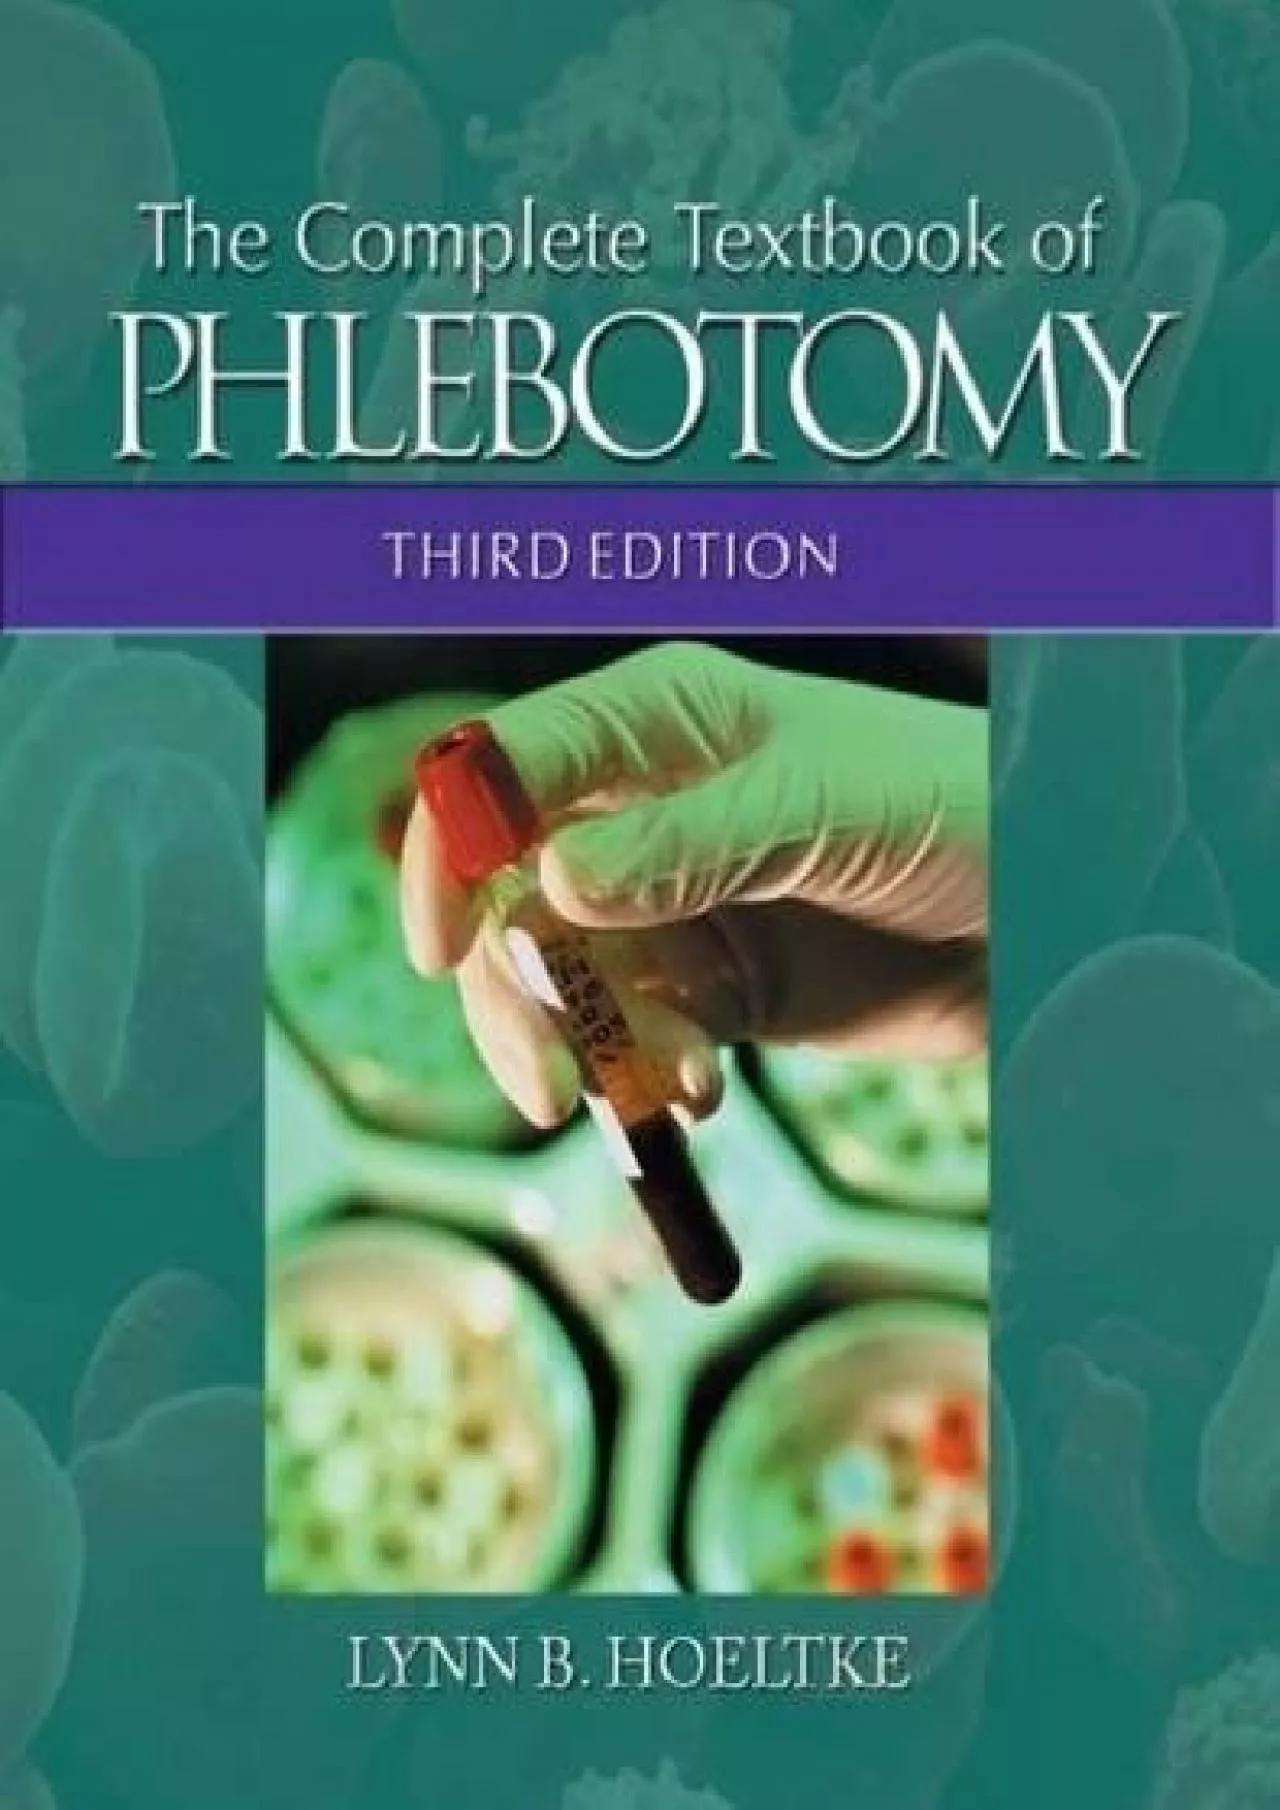 (DOWNLOAD)-The Complete Textbook of Phlebotomy (Medical Lab Technician Solutions to Enhance